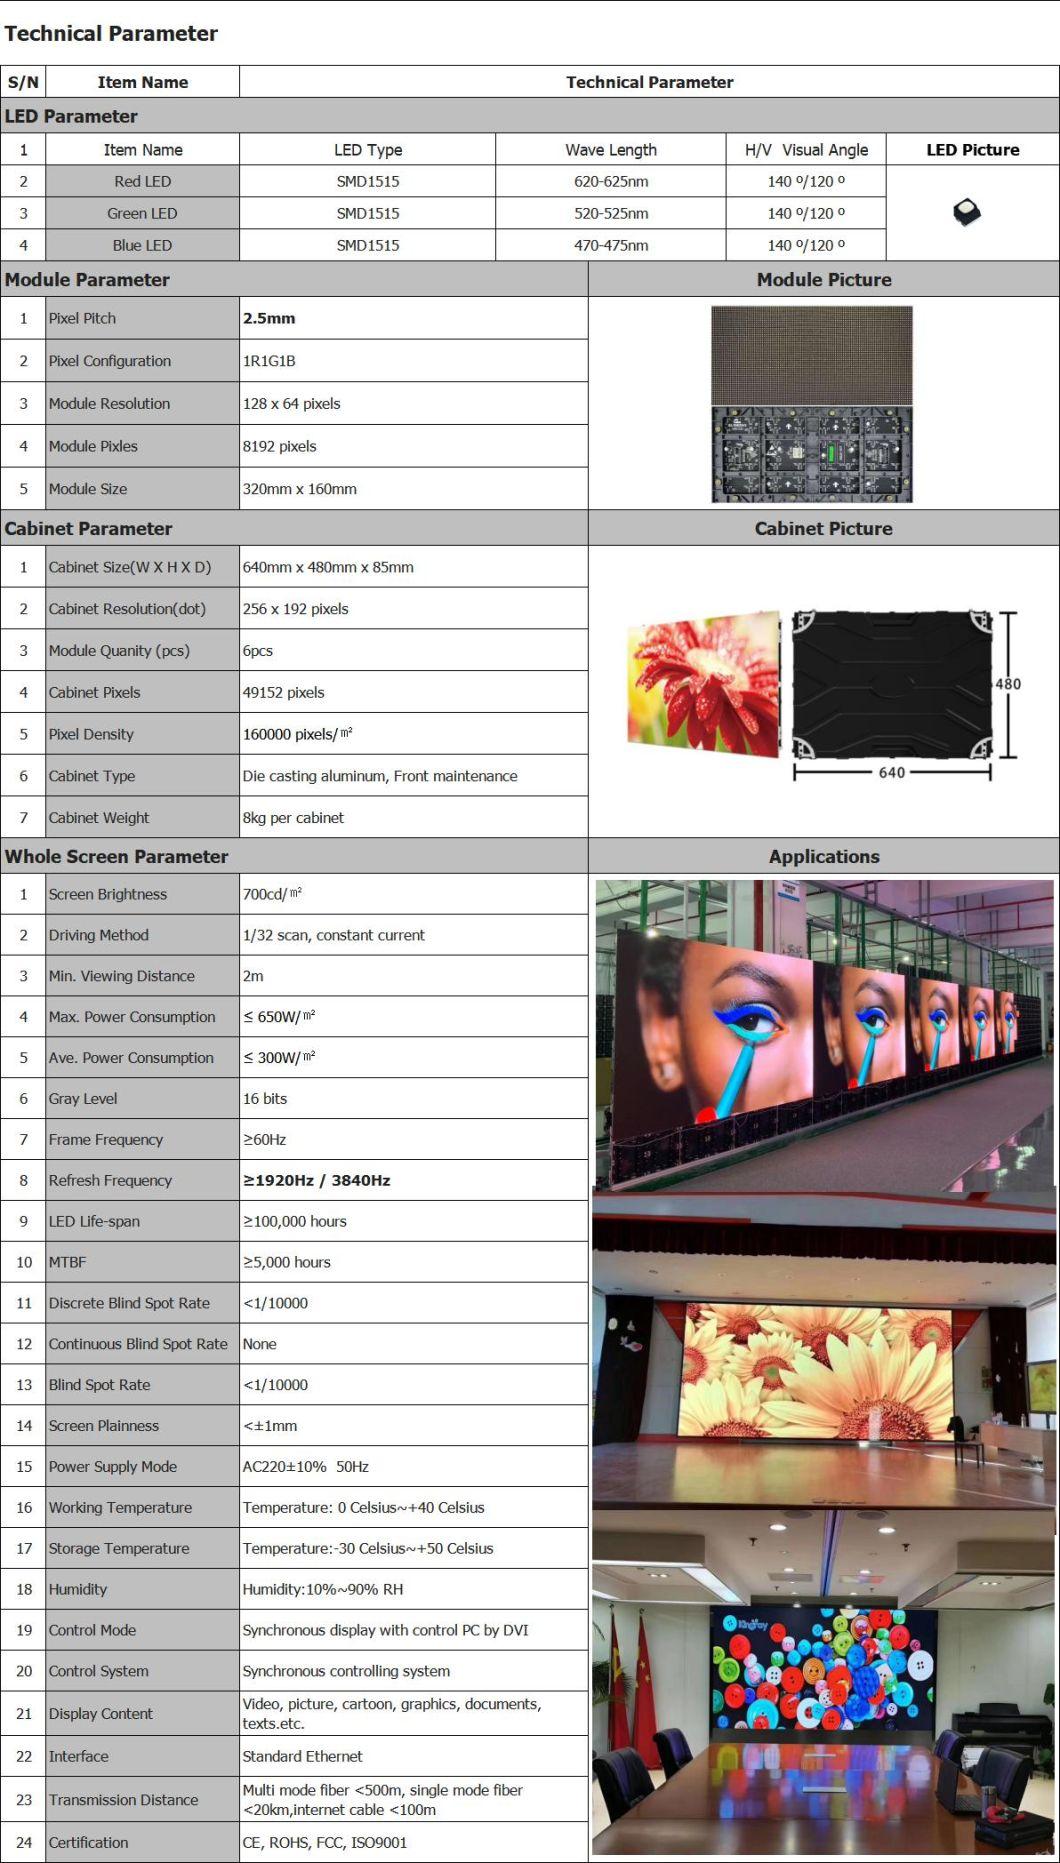 3840Hz High Refresh Electronic LED Display Wall Screens Factory (P2.5)